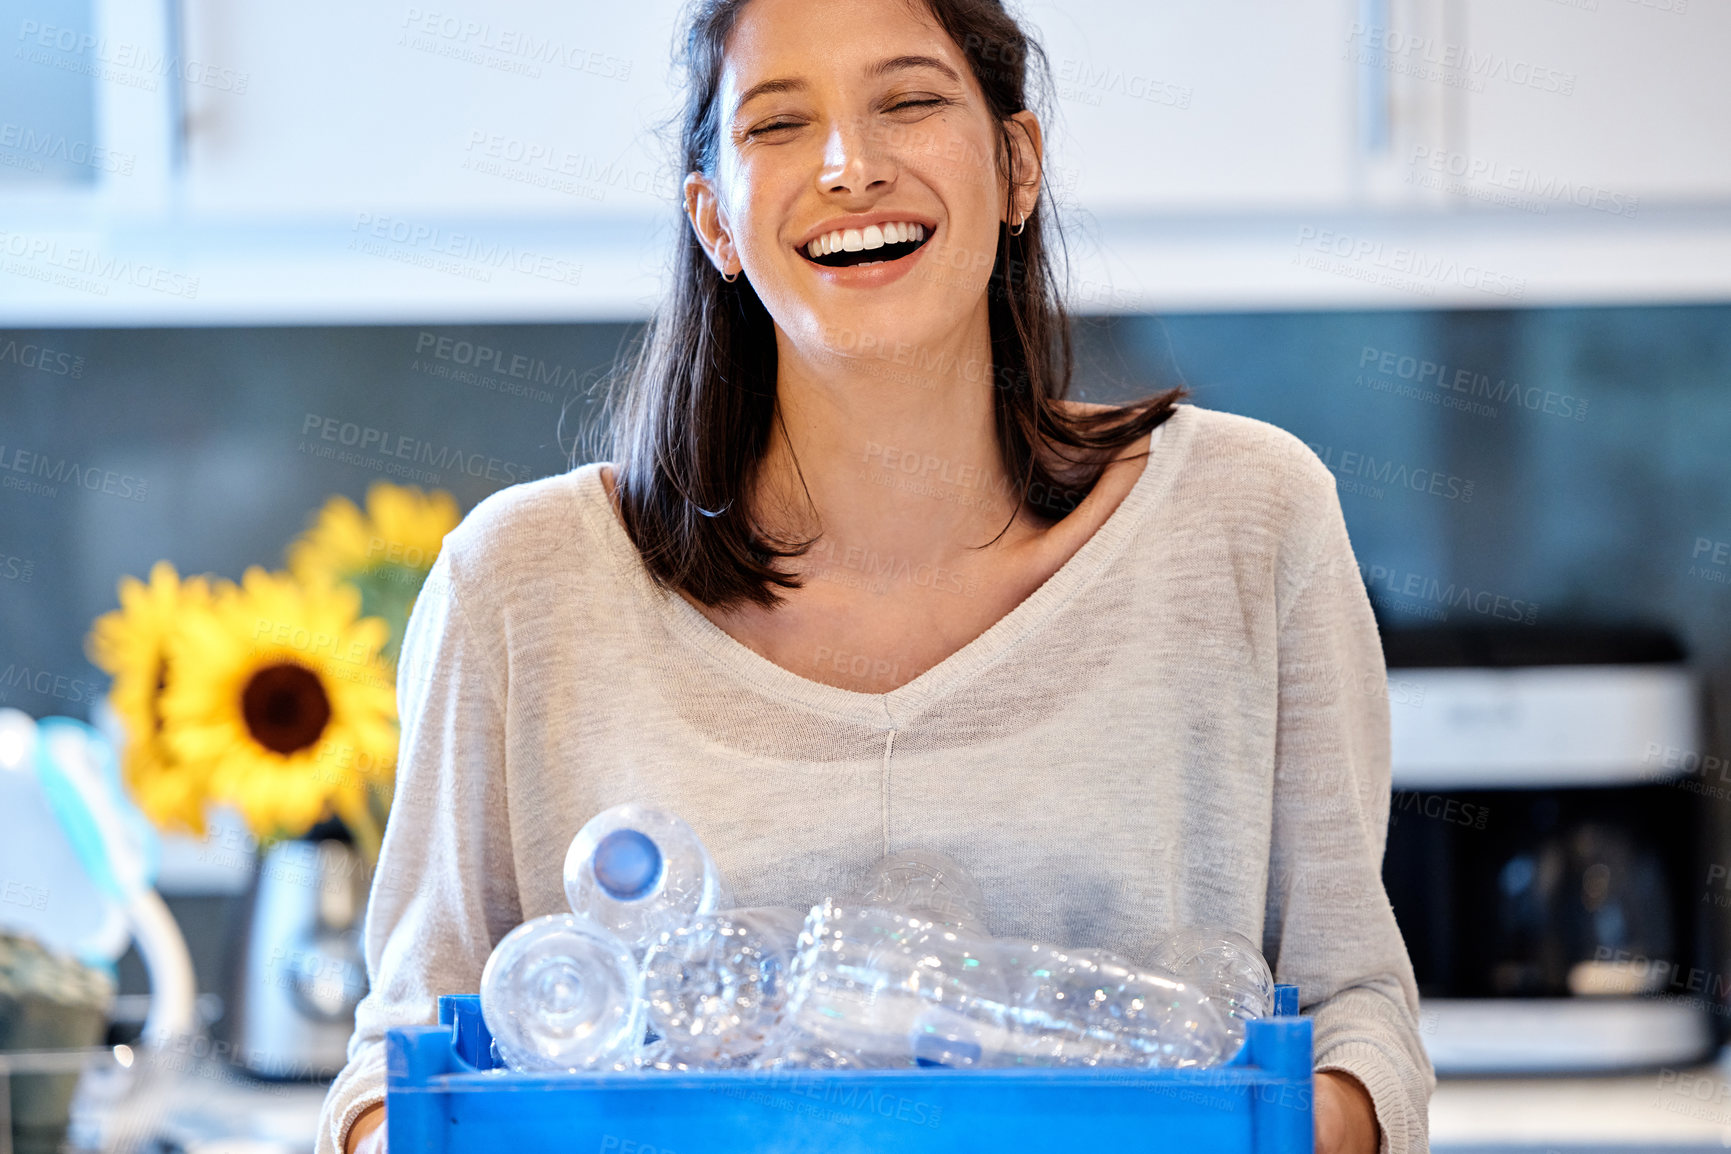 Buy stock photo Shot of a young woman getting ready to recycle some bottles at home